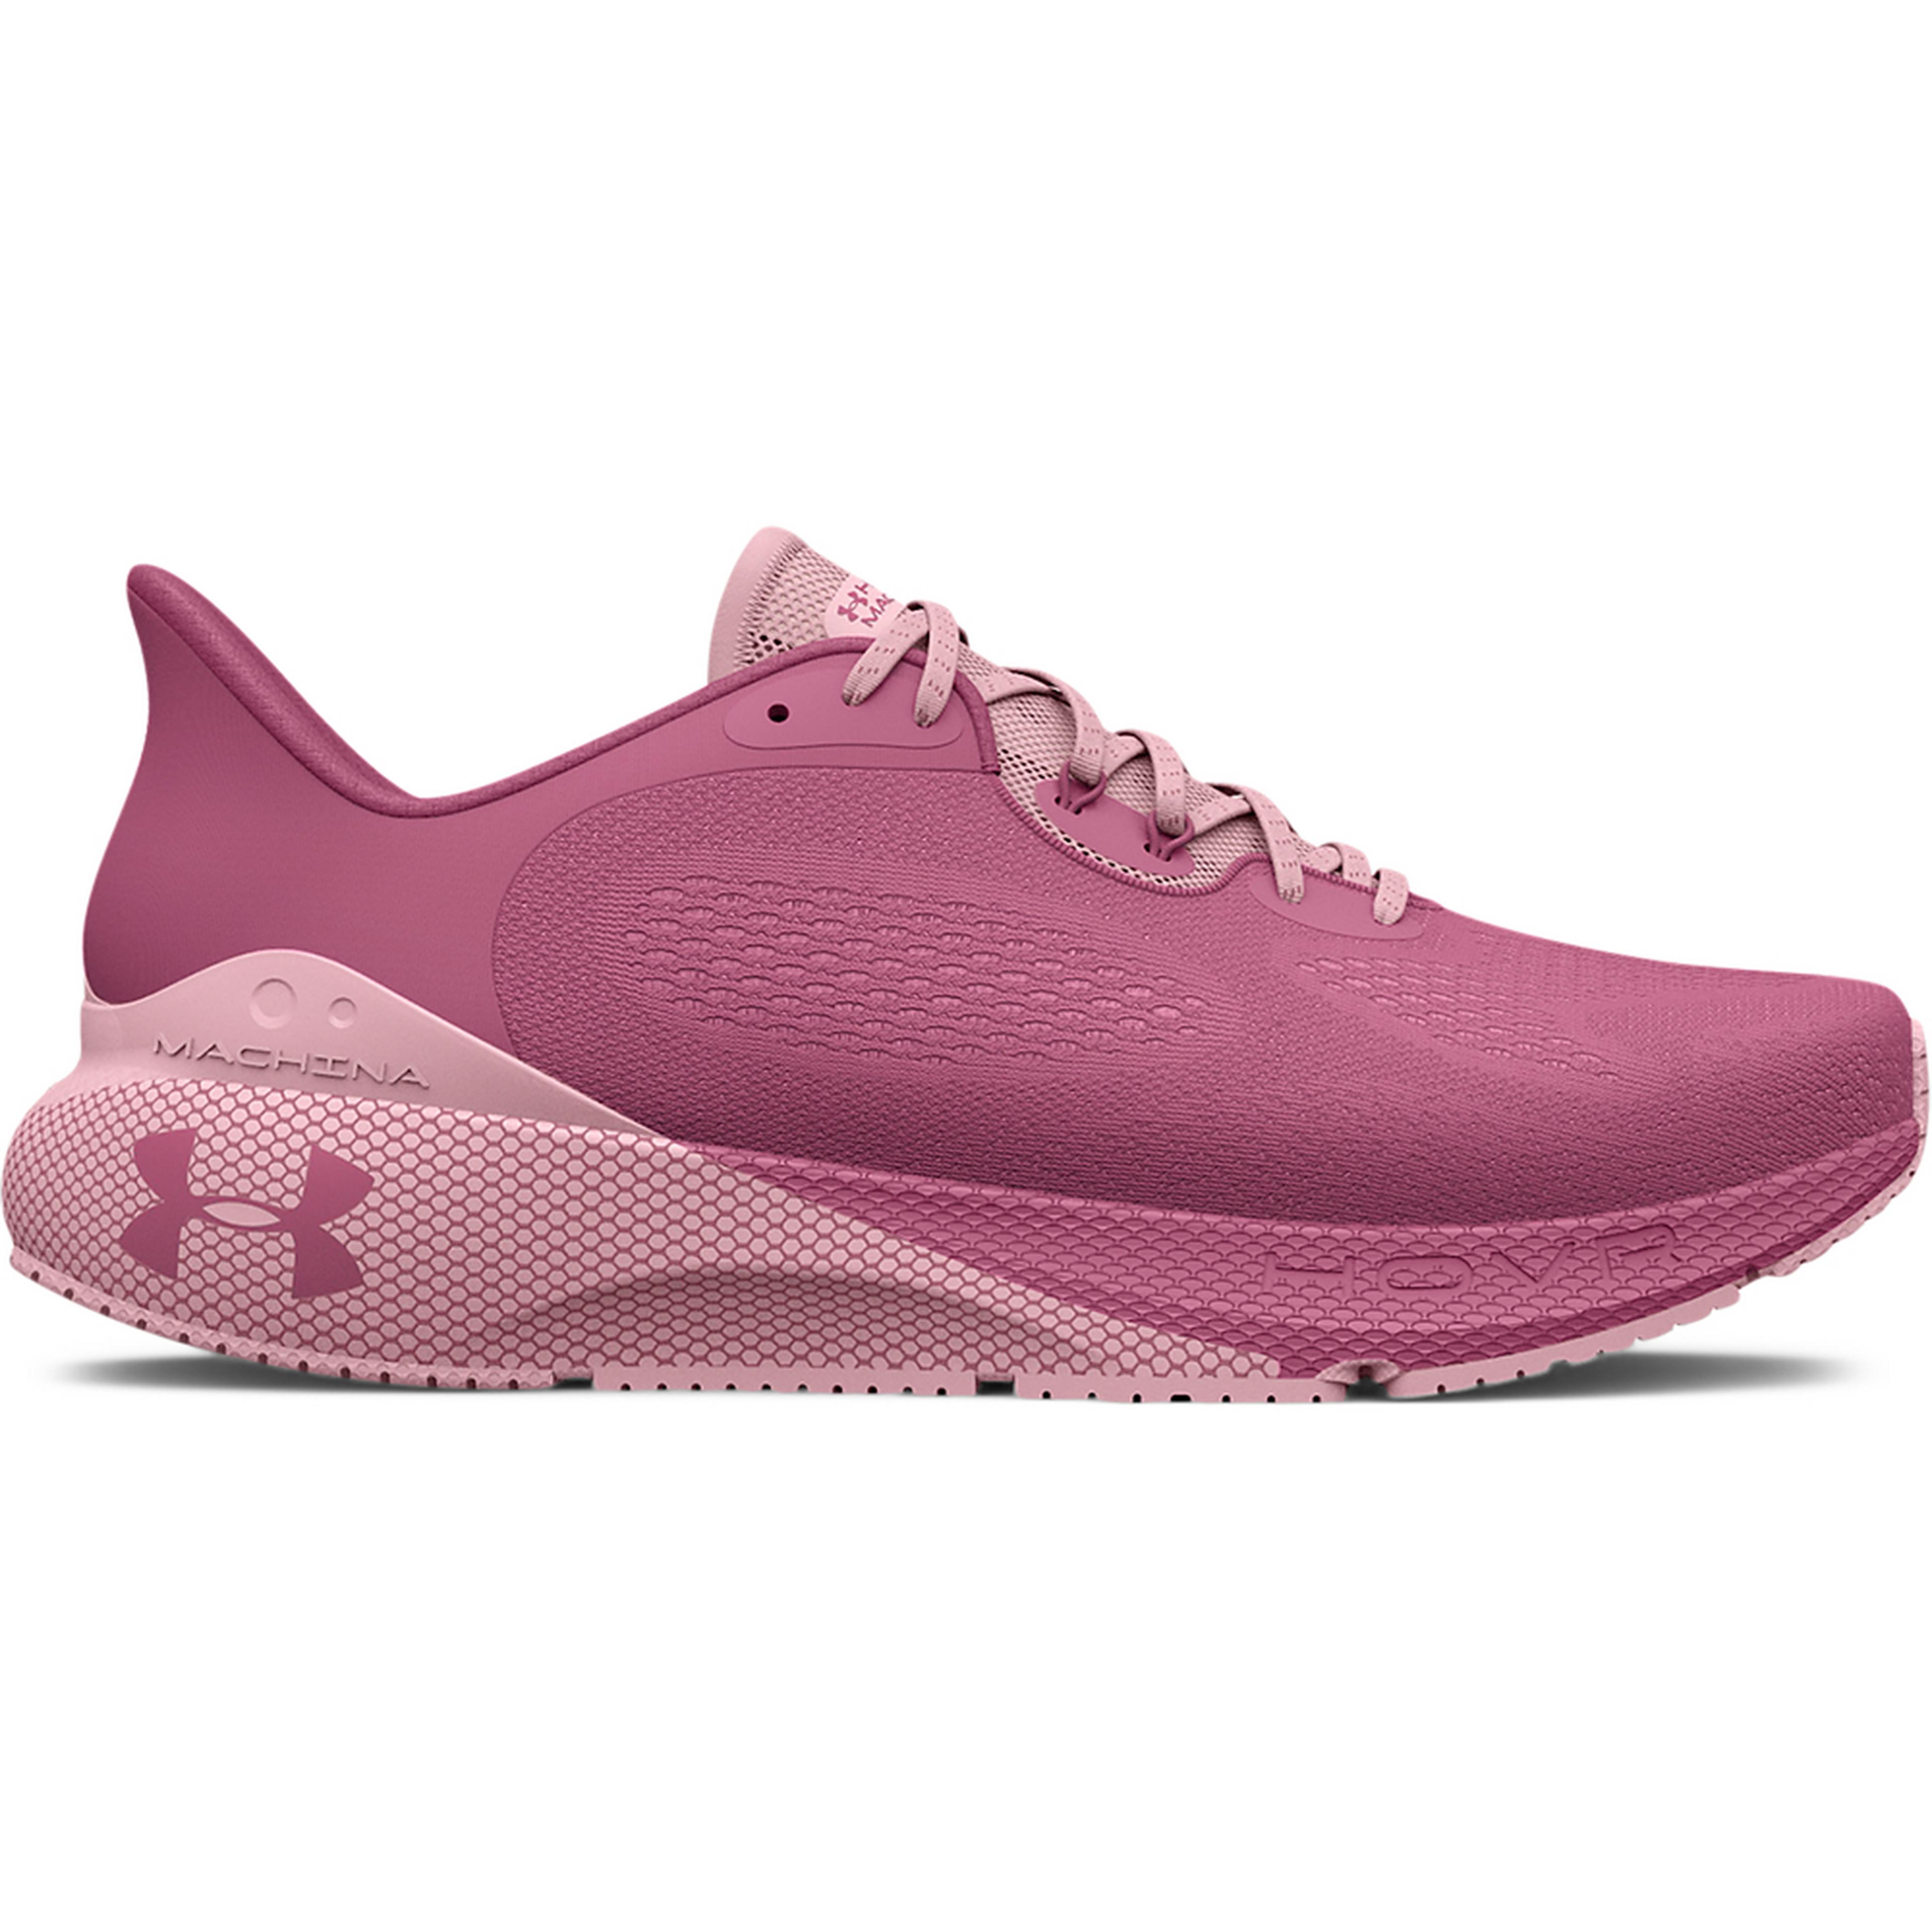 Under Armour Women's HOVR Machina 3 Running Shoes | Wiggle